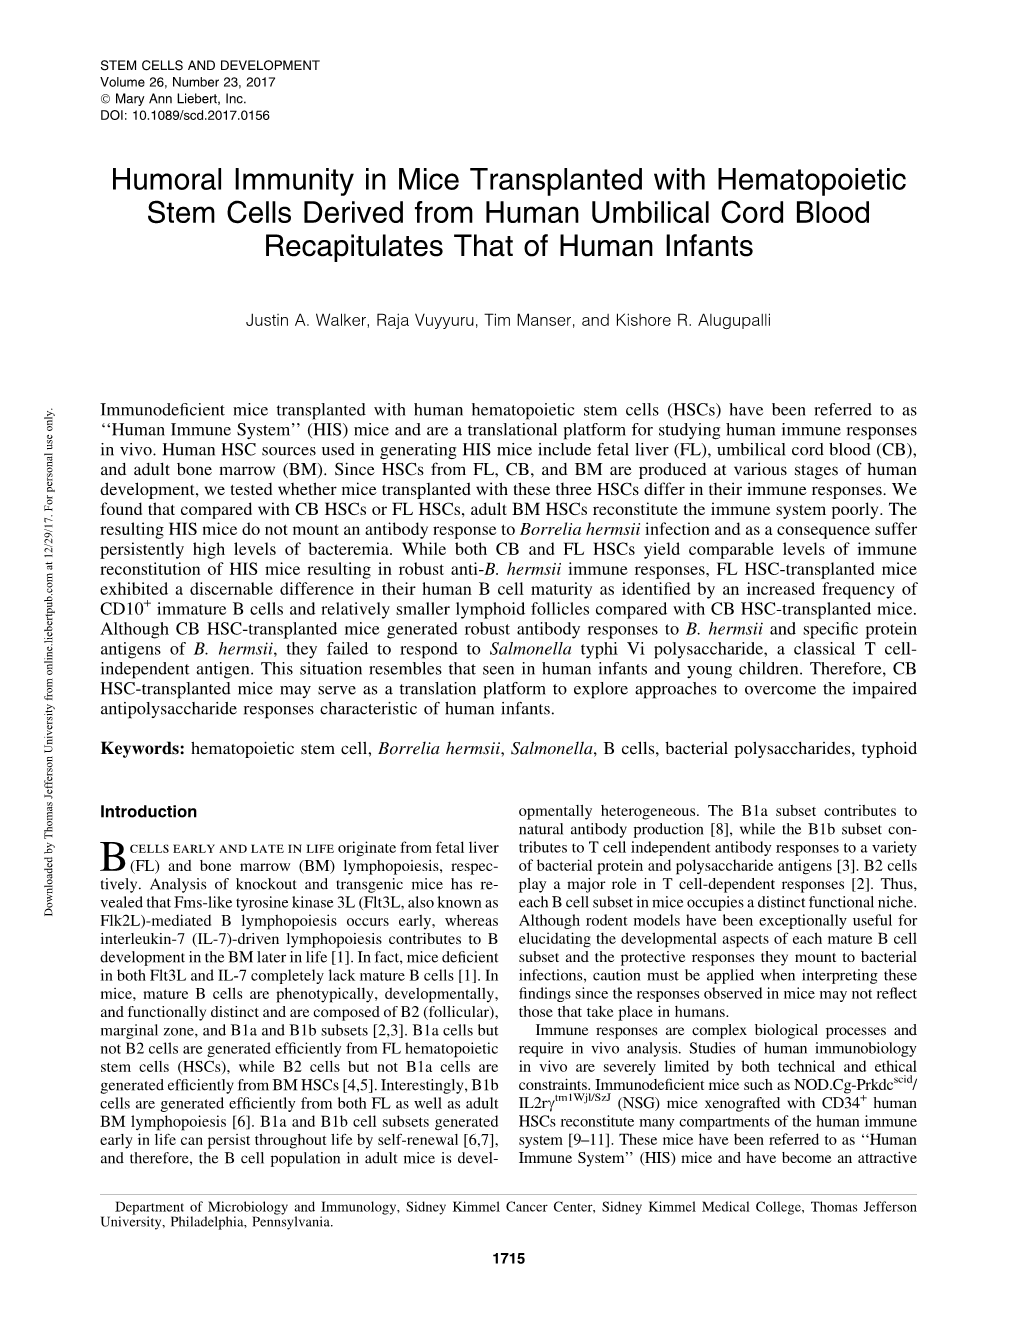 Humoral Immunity in Mice Transplanted with Hematopoietic Stem Cells Derived from Human Umbilical Cord Blood Recapitulates That of Human Infants